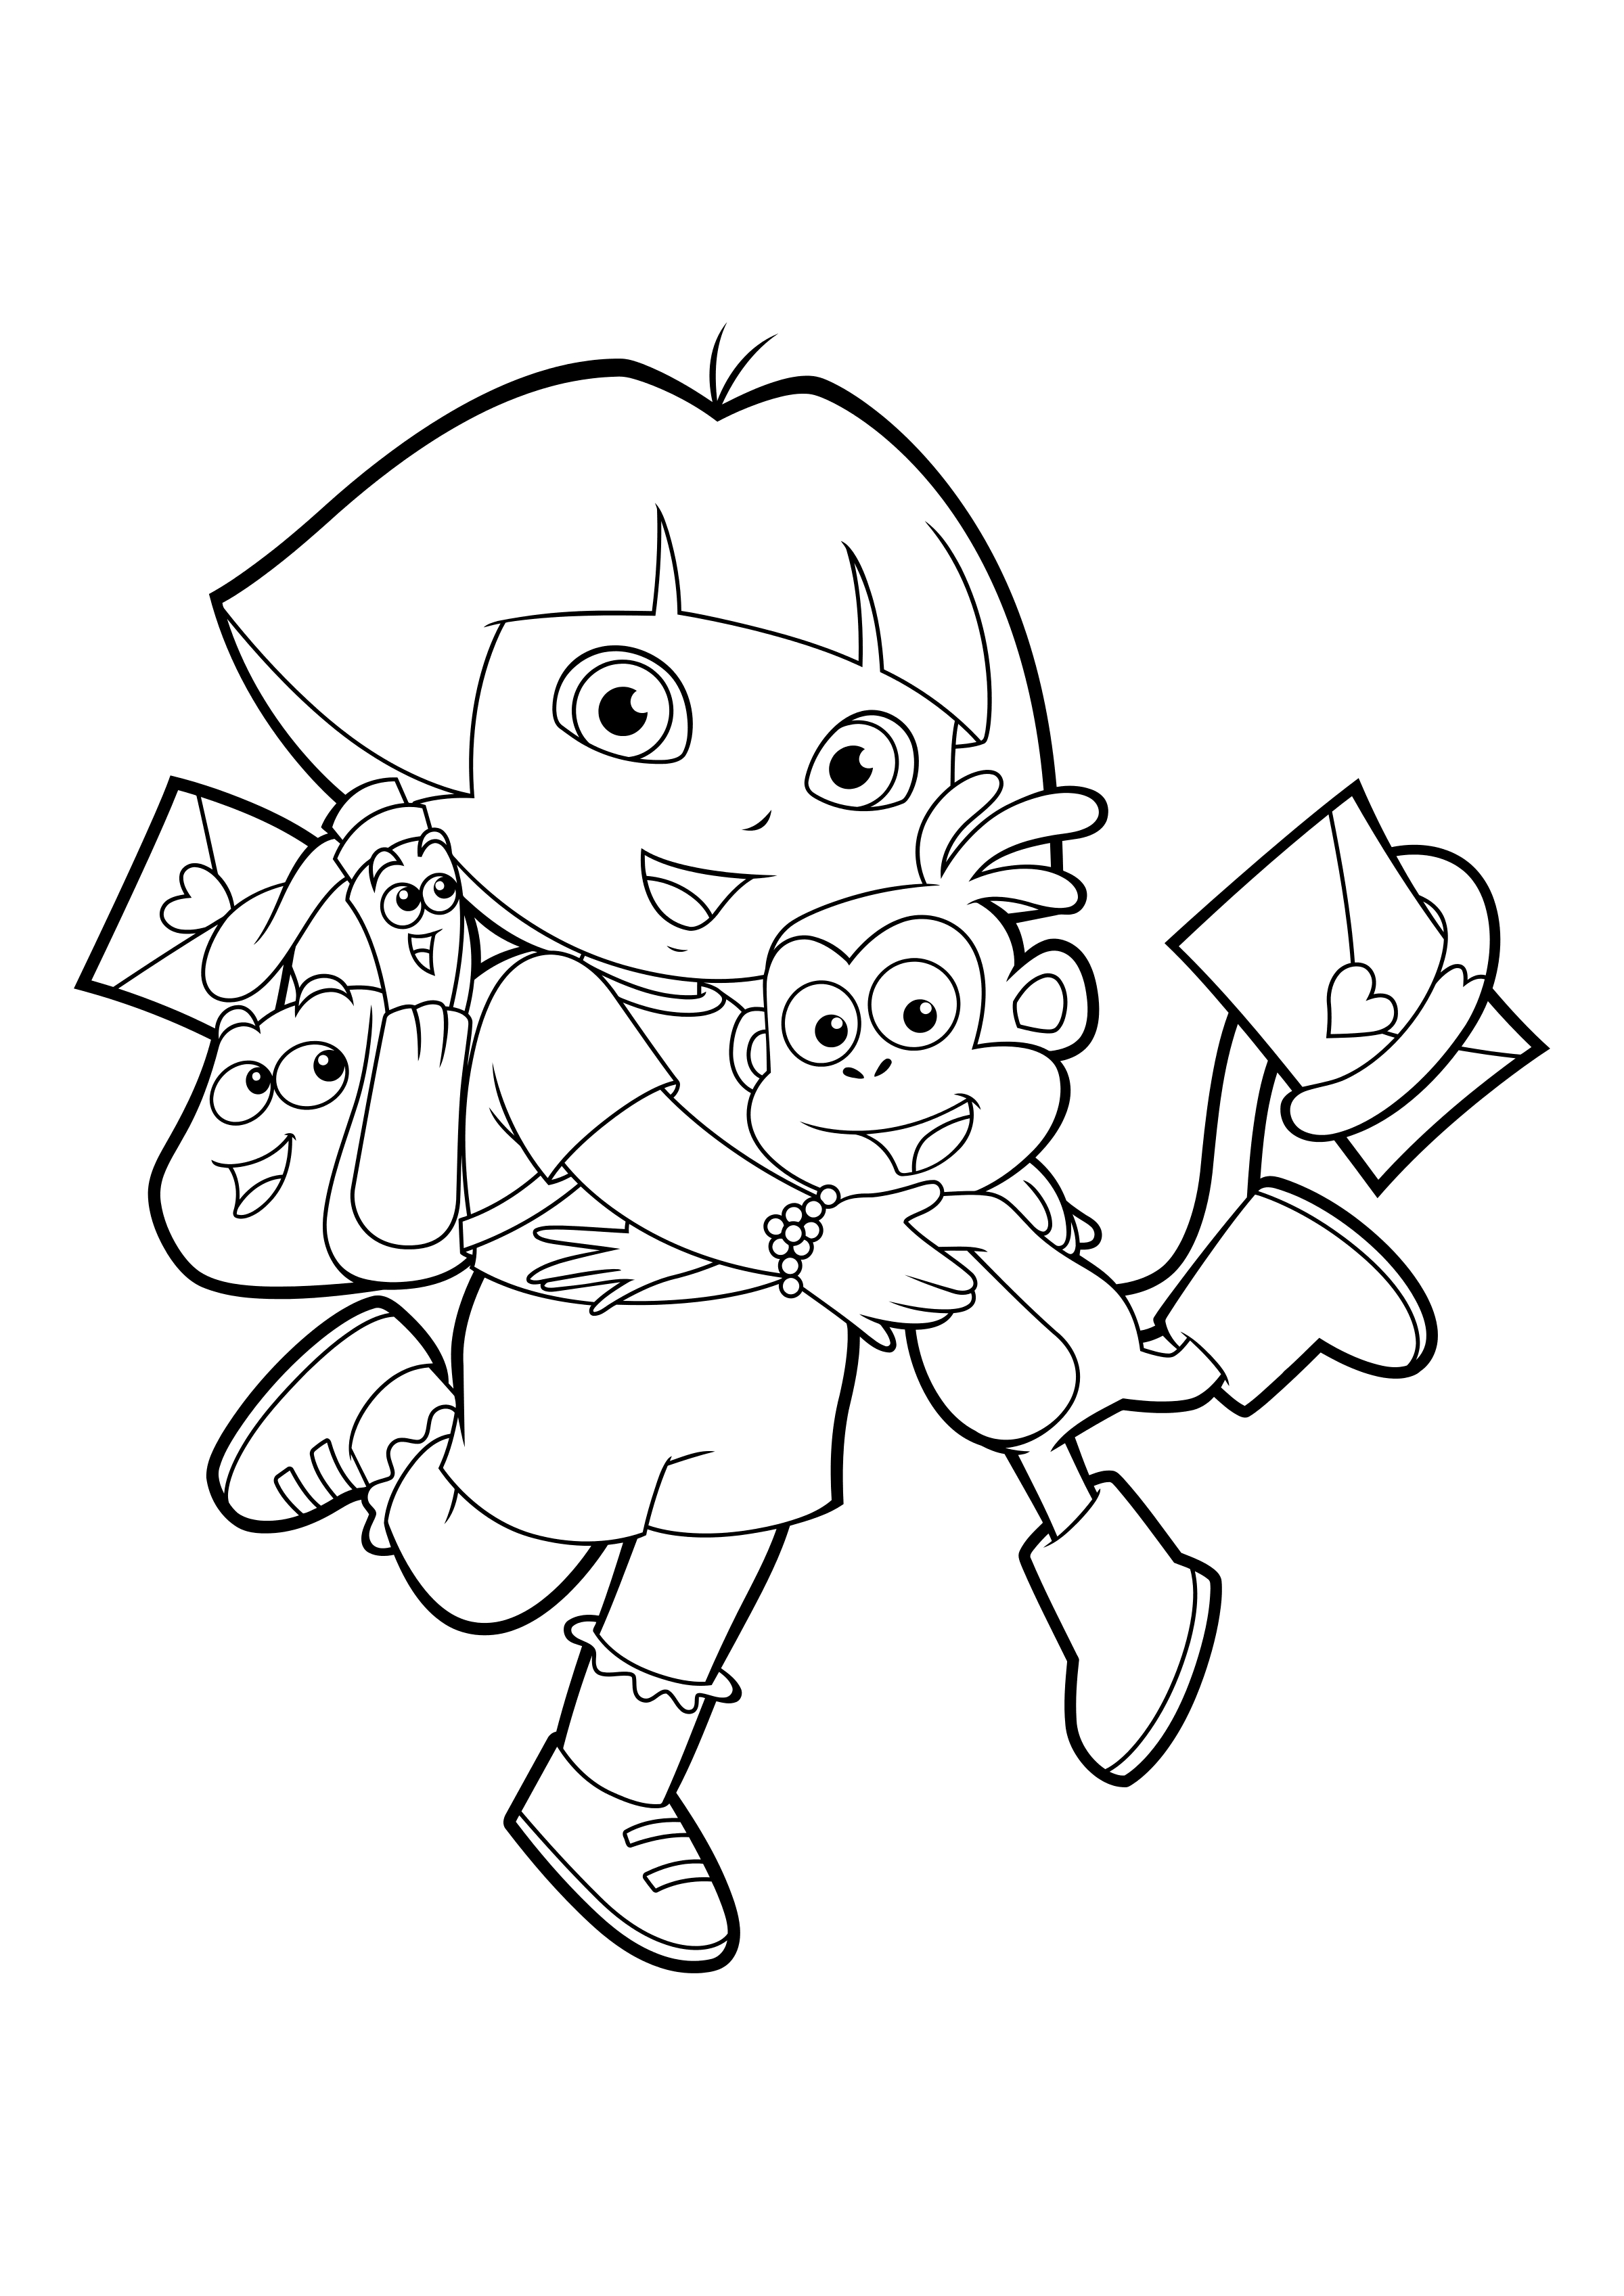 Coloring page Dora the Explorer Dora and the Boots